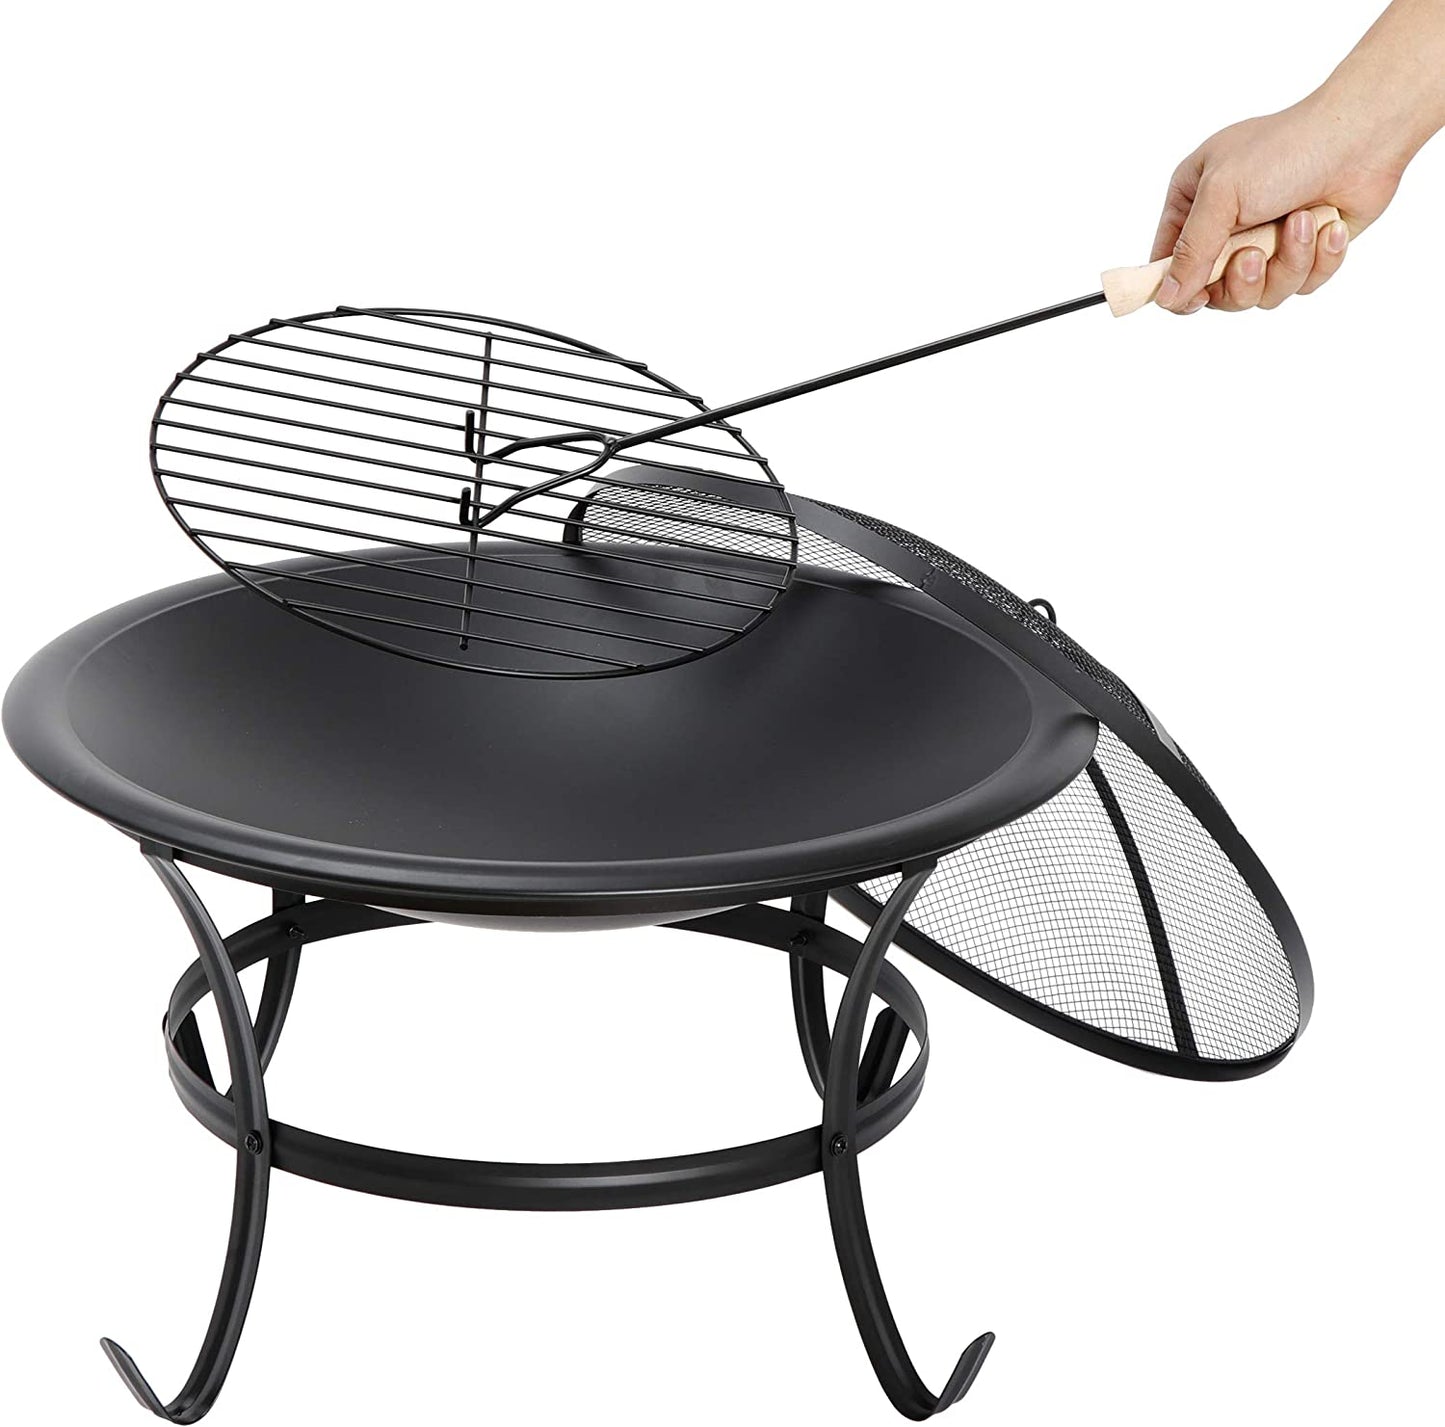 Fire Pit 22’’ Outdoor Fire Pits Wood Burning Patio Fire Bowl Firepit with BBQ Grill, Spark Screen and Fire Poker for Backyard Outside Camping Picnic Bonfires